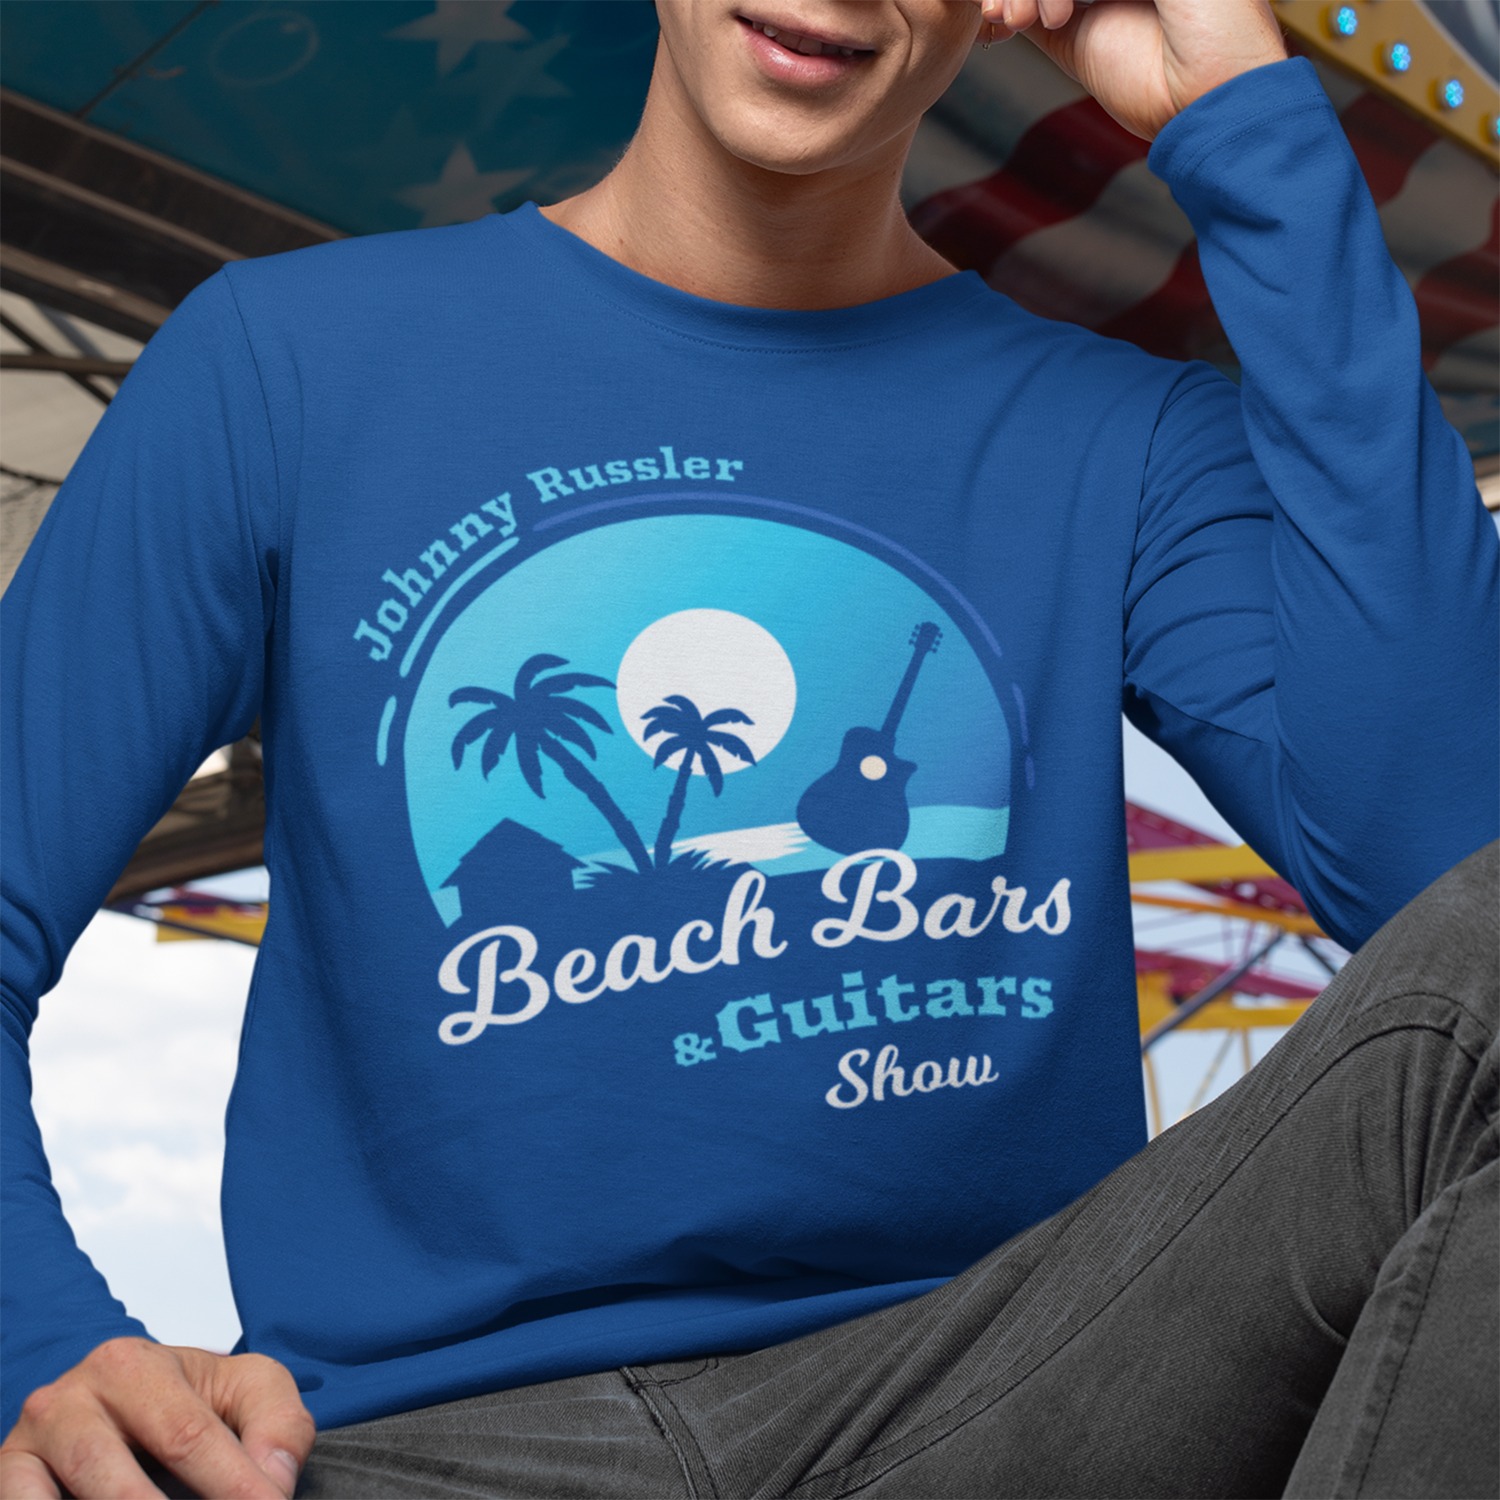 Beach Bars and Guitars Show Ladies Fitted Tee, The Troprock Shop